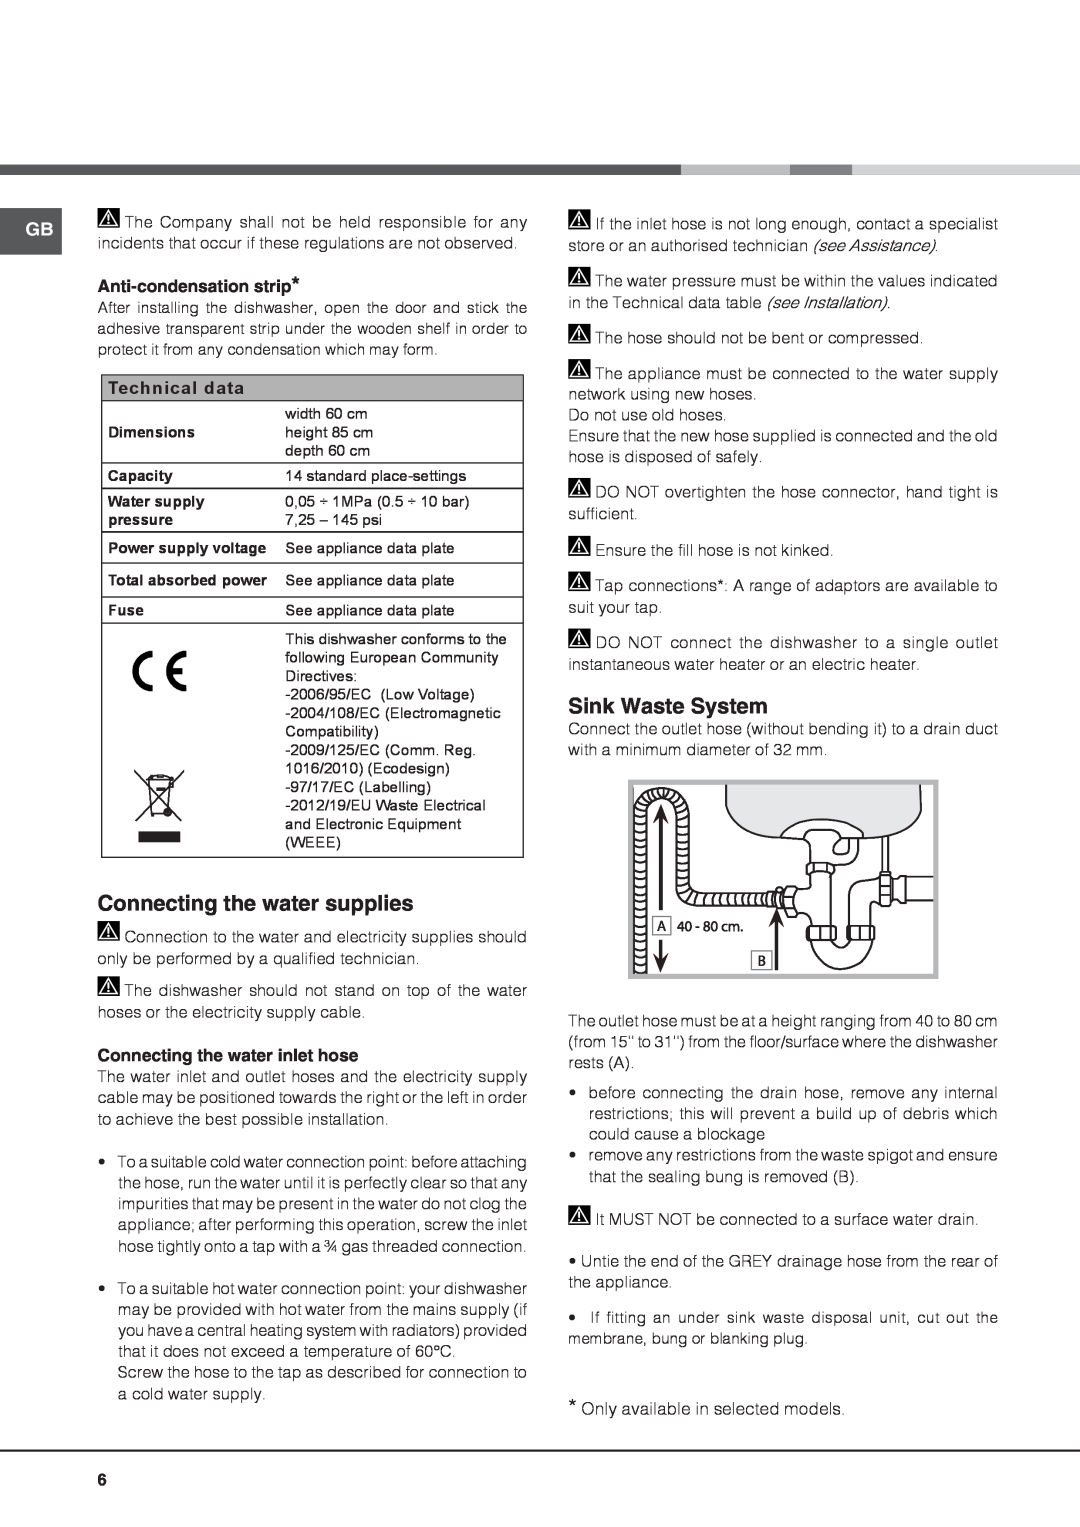 Hotpoint FDEF 33121 manual Connecting the water supplies, Sink Waste System, Anti-condensation strip, Technical data 